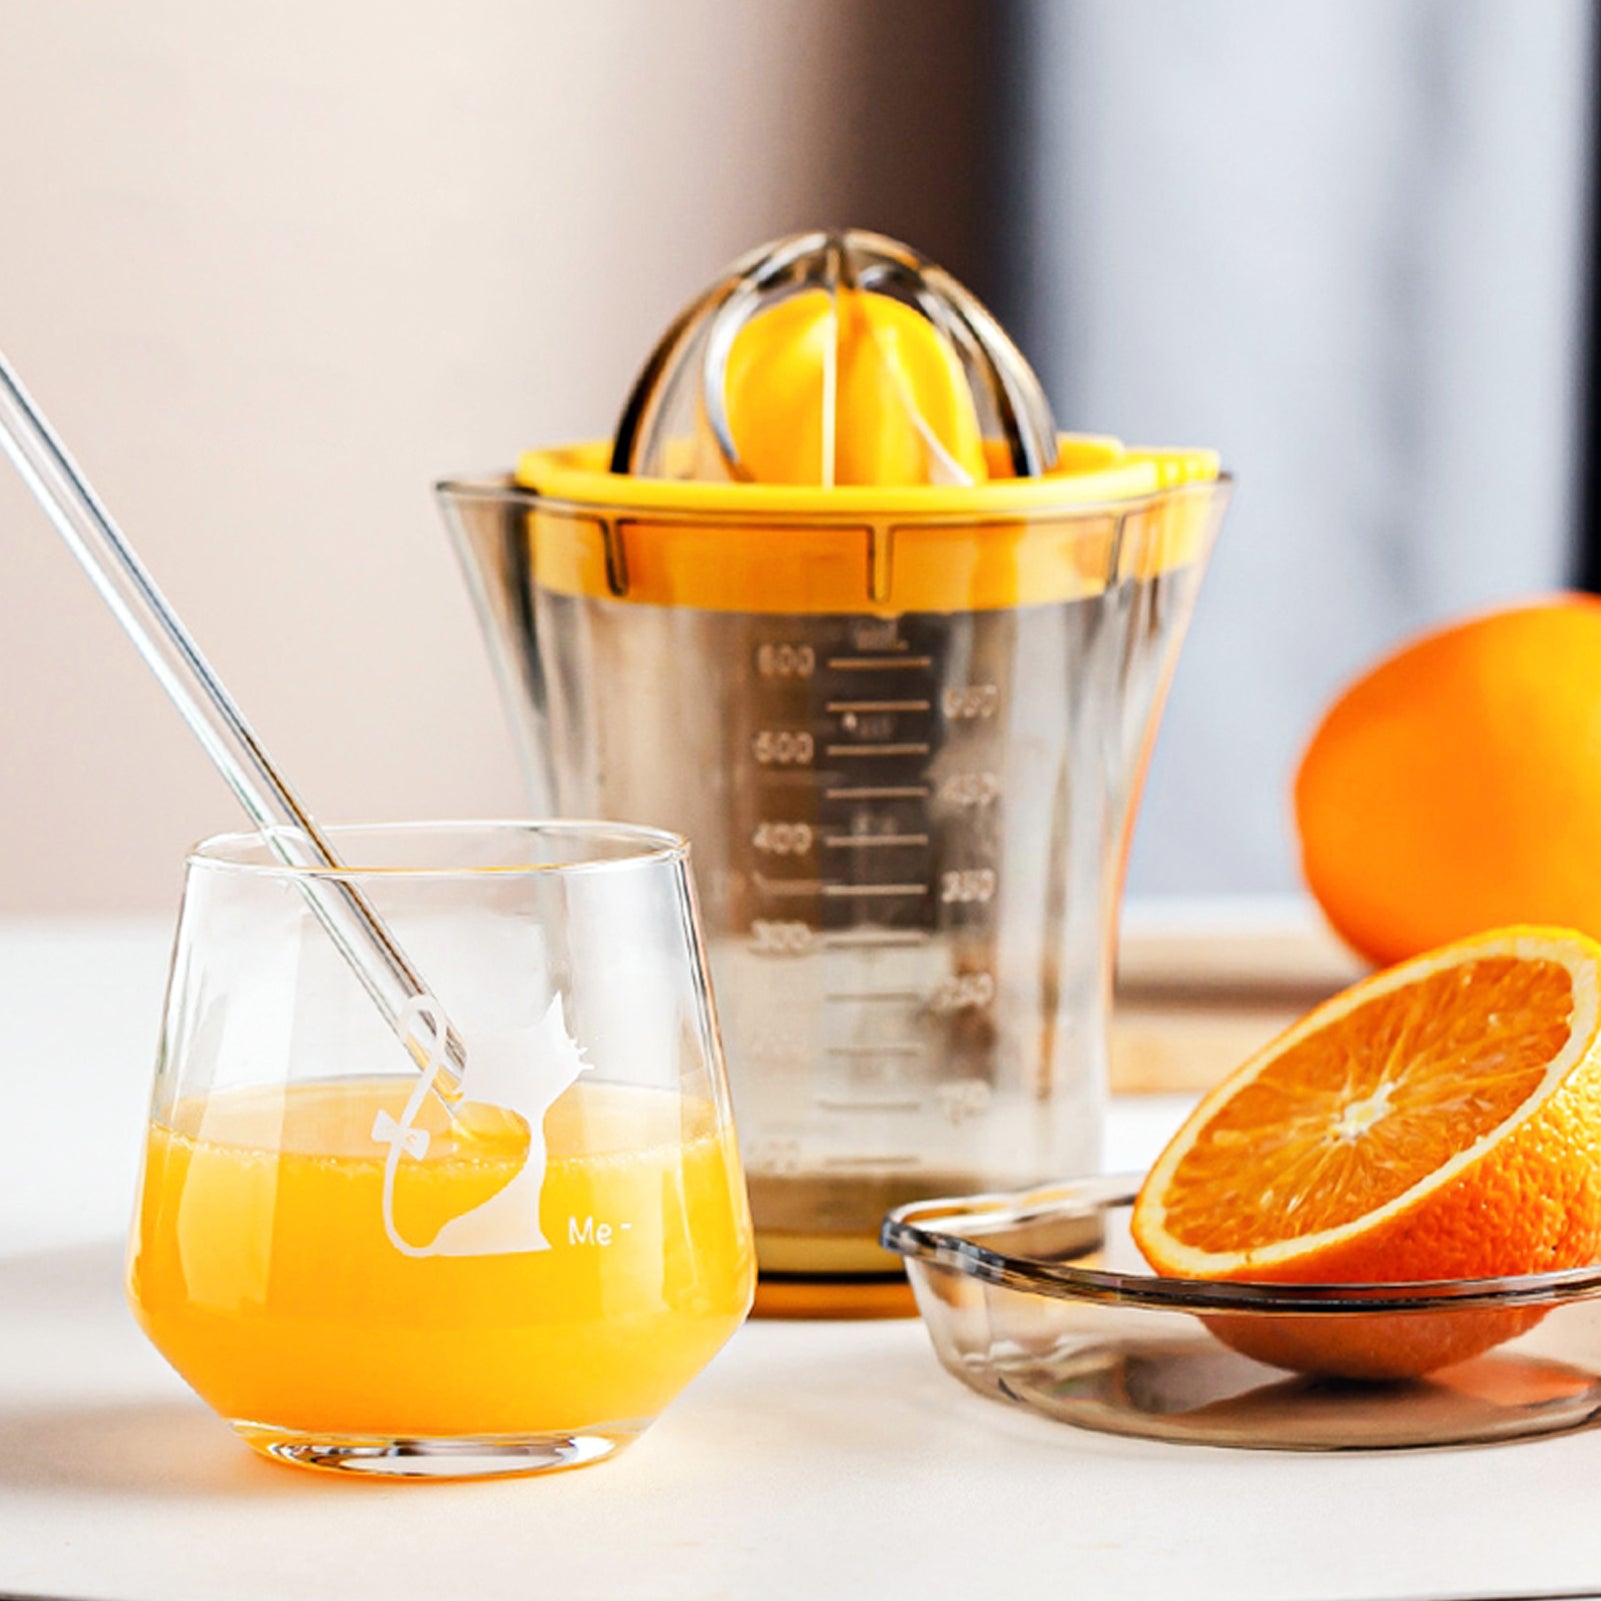 JAMOR Manual Juicer,Lemon Juicer,Small Citrus Juicer,Manual Rotary Squeezer,Professional Manual Juicer,Kitchen Tool With Easy Pour Spout,Non-Slip Base,Can Be Used In The Dishwasher For Easy Storage